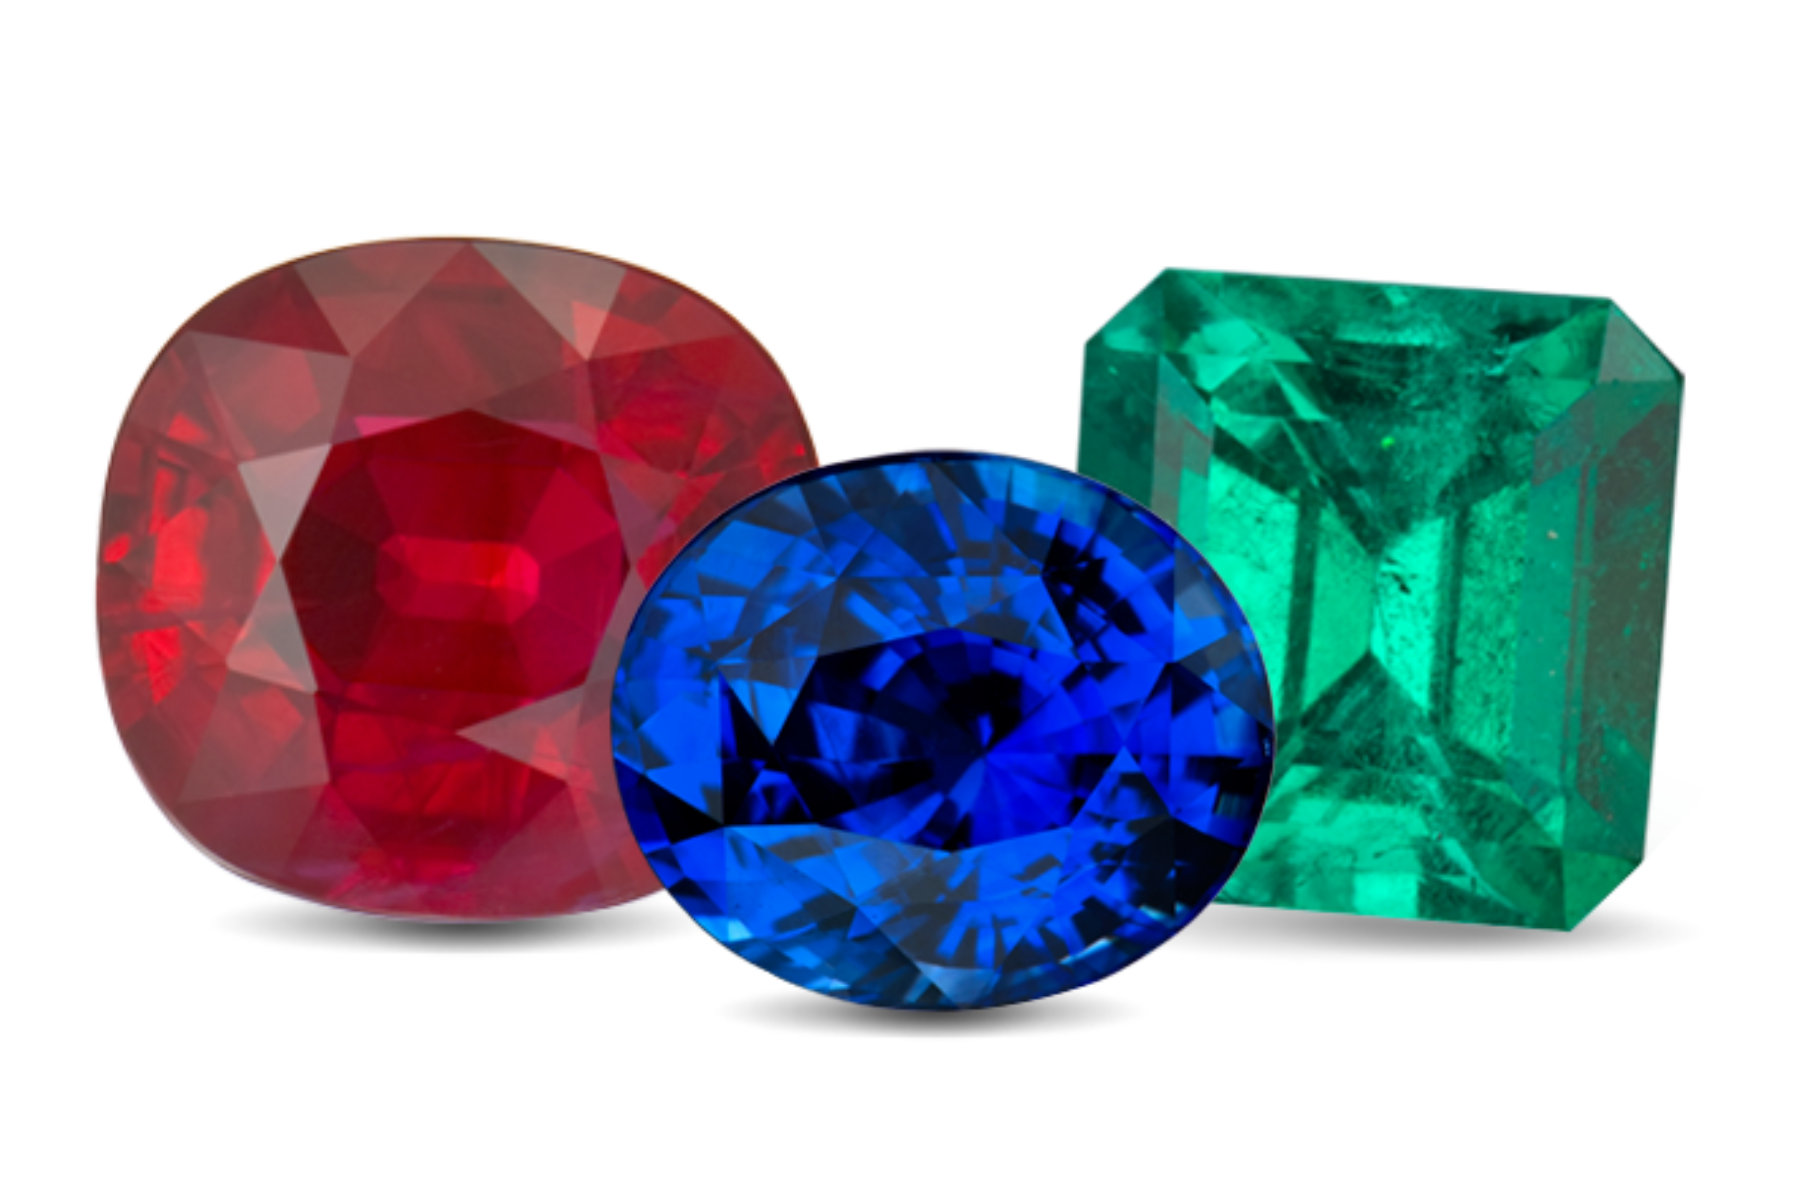 A cluster of ruby, sapphire, and emerald stones